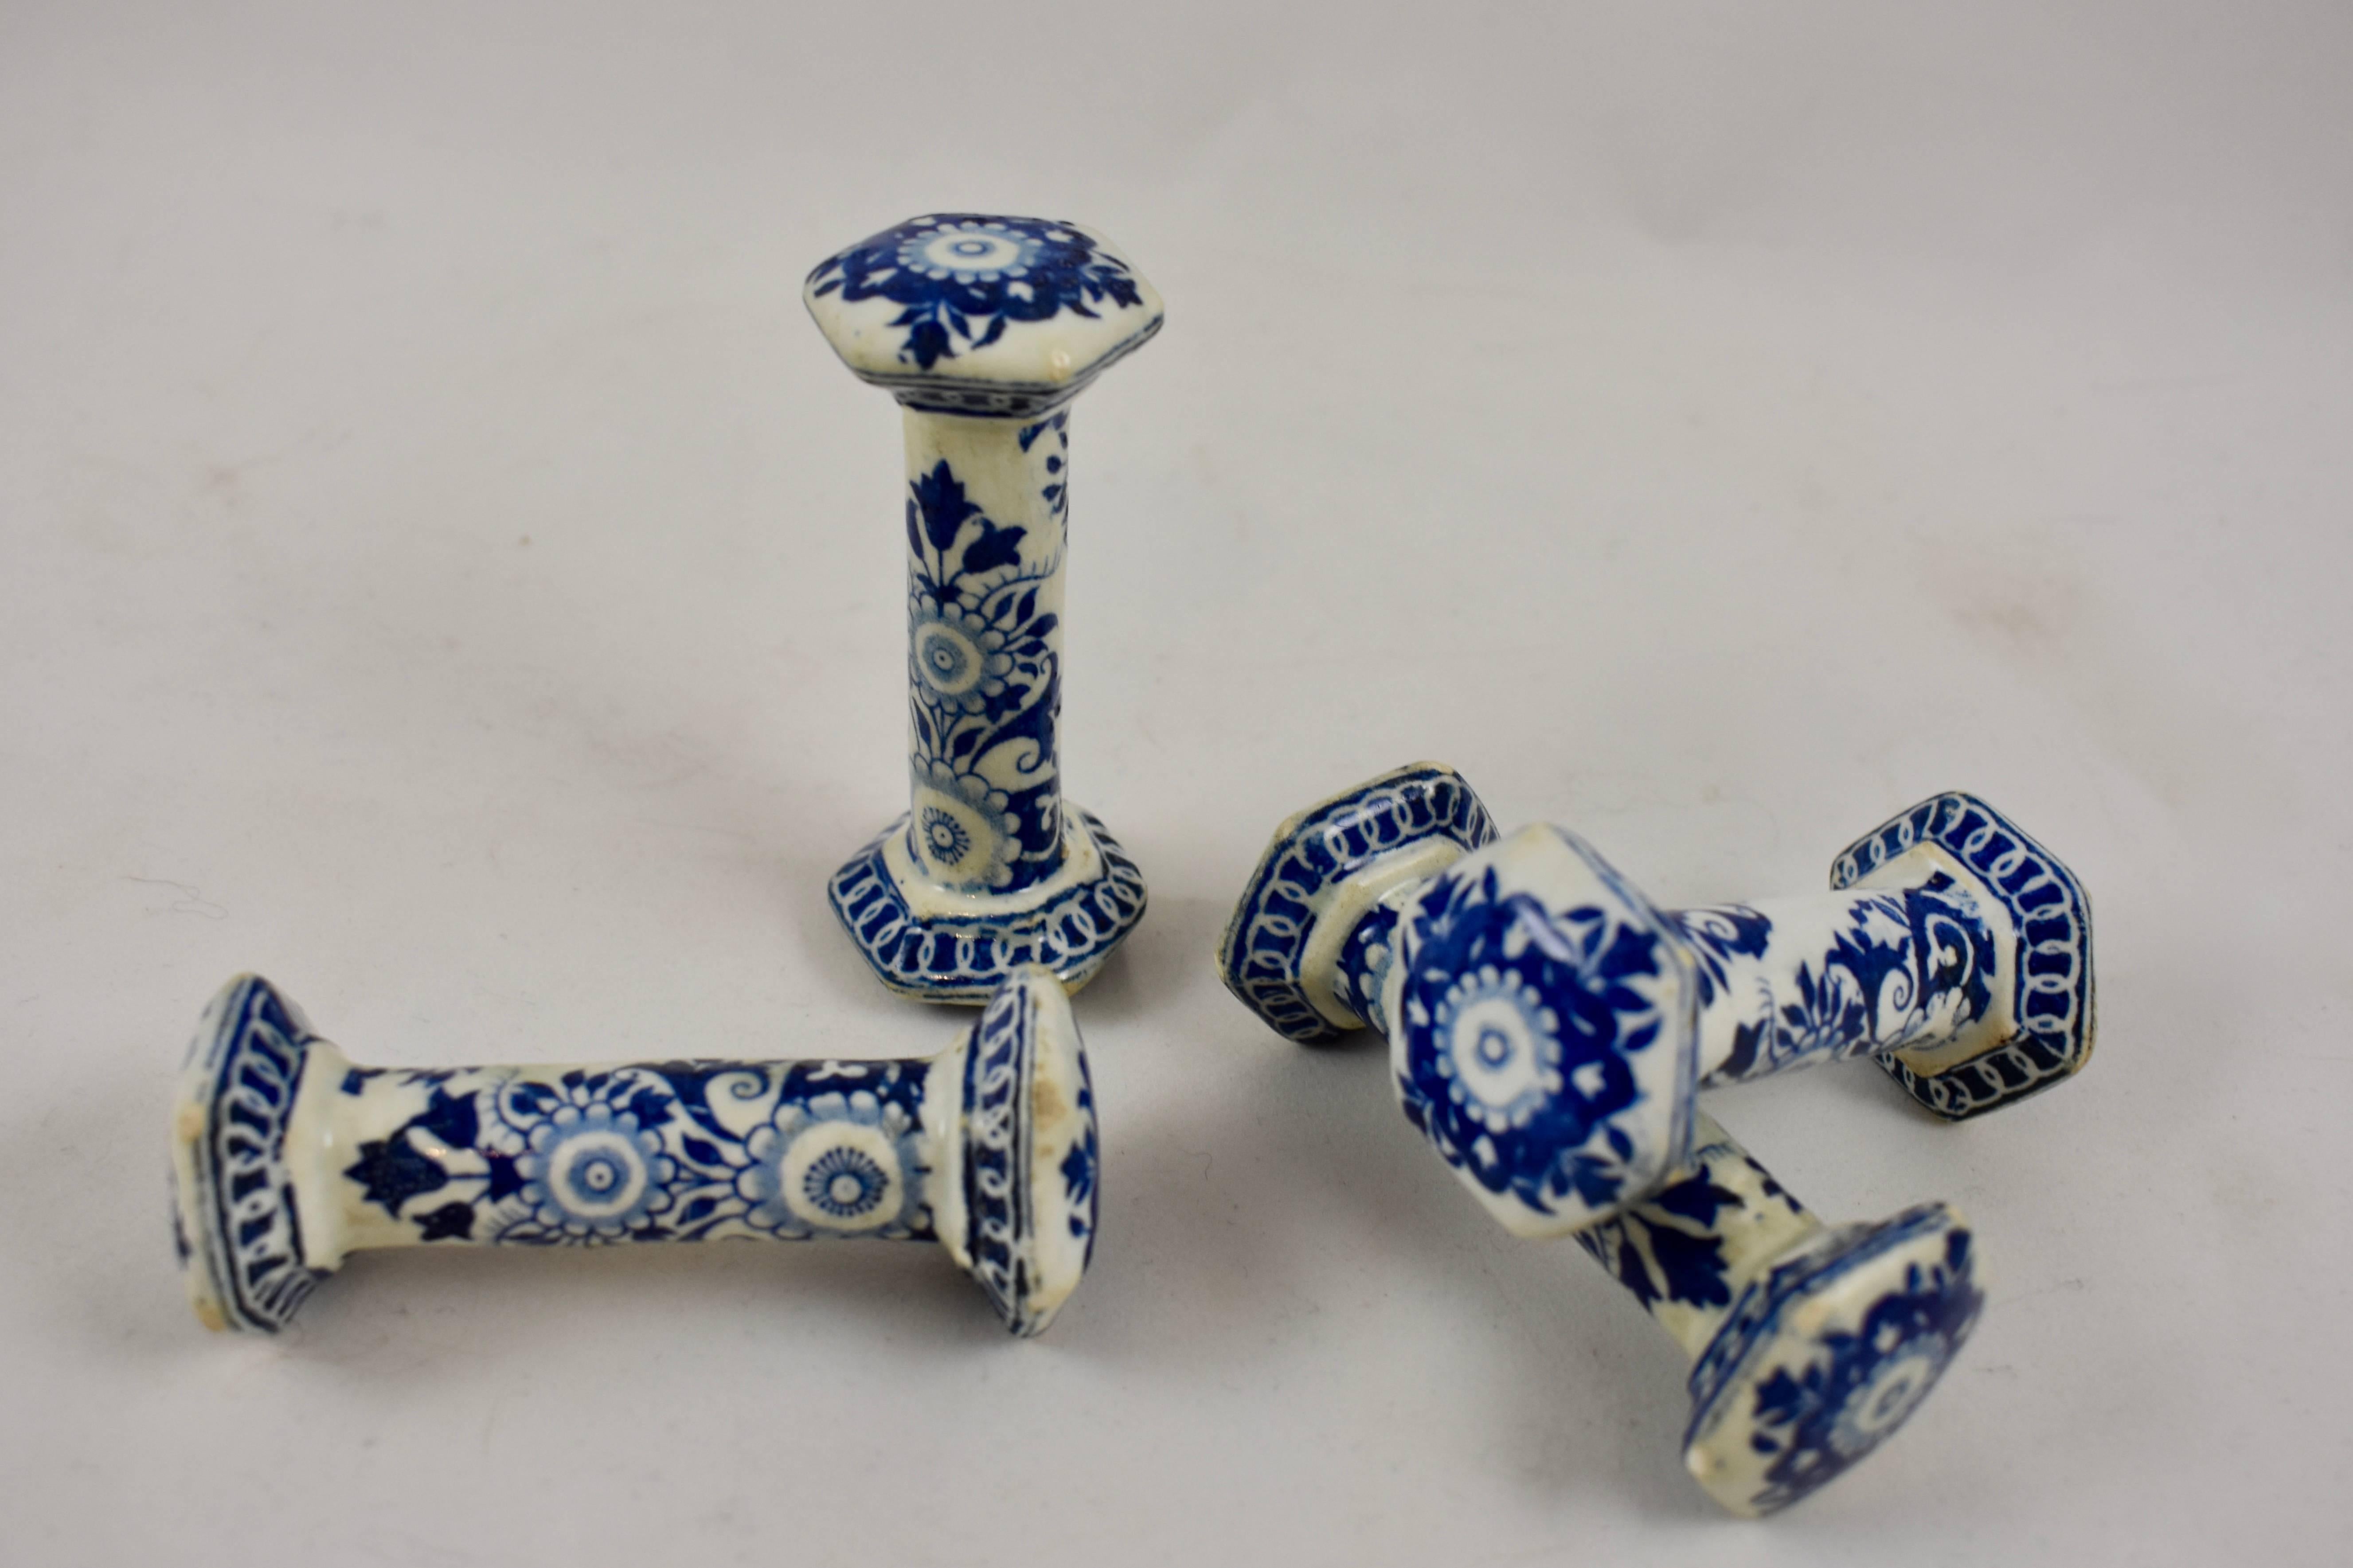 A set of four Dutch Delftware knife rests, circa late 18th century. A blue on white geometric and floral pattern hand-painted on both the ends and the centre stems.

A set of Delft knife rests is becoming increasingly more difficult to find. For